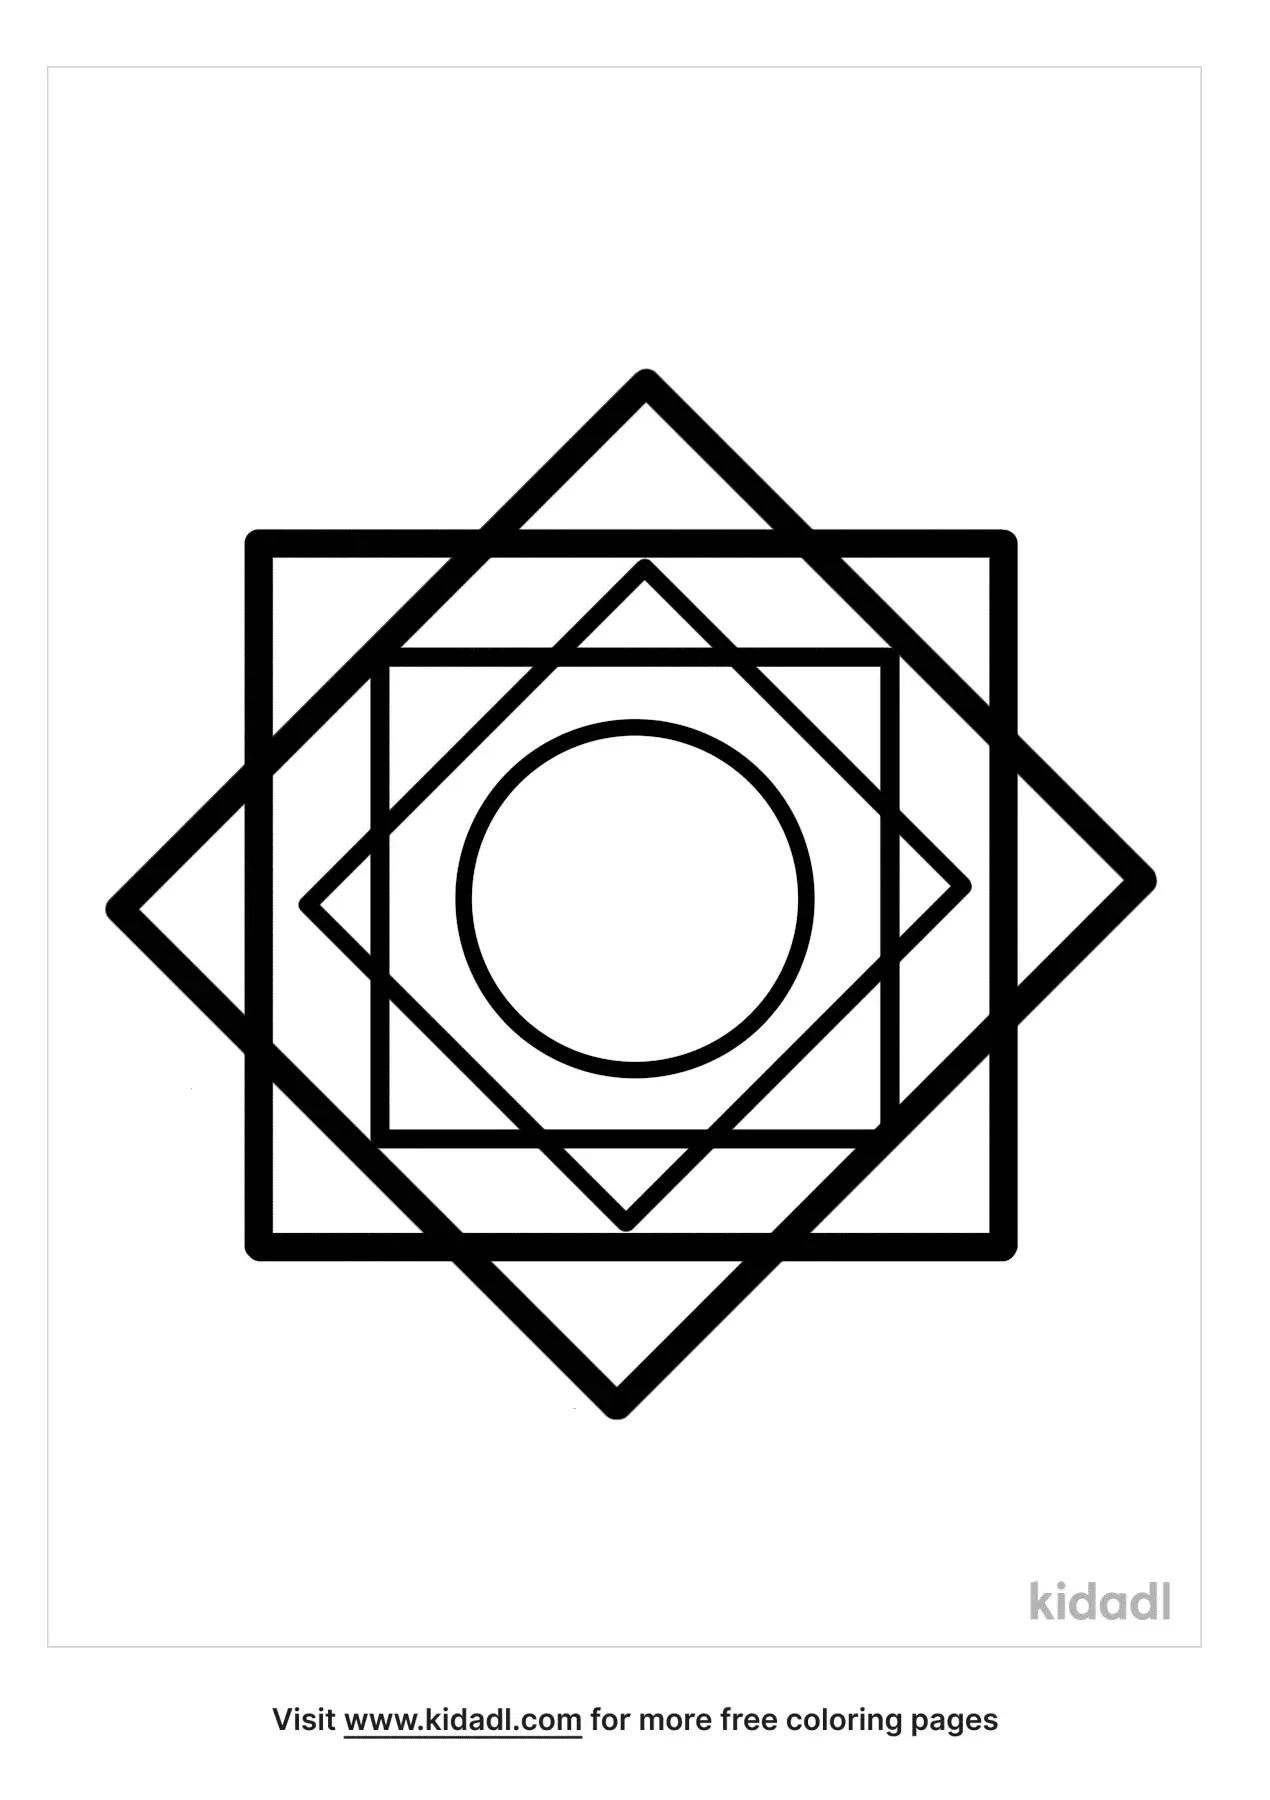 Free Geometric Coloring Page | Coloring Page Printables | Kidadl